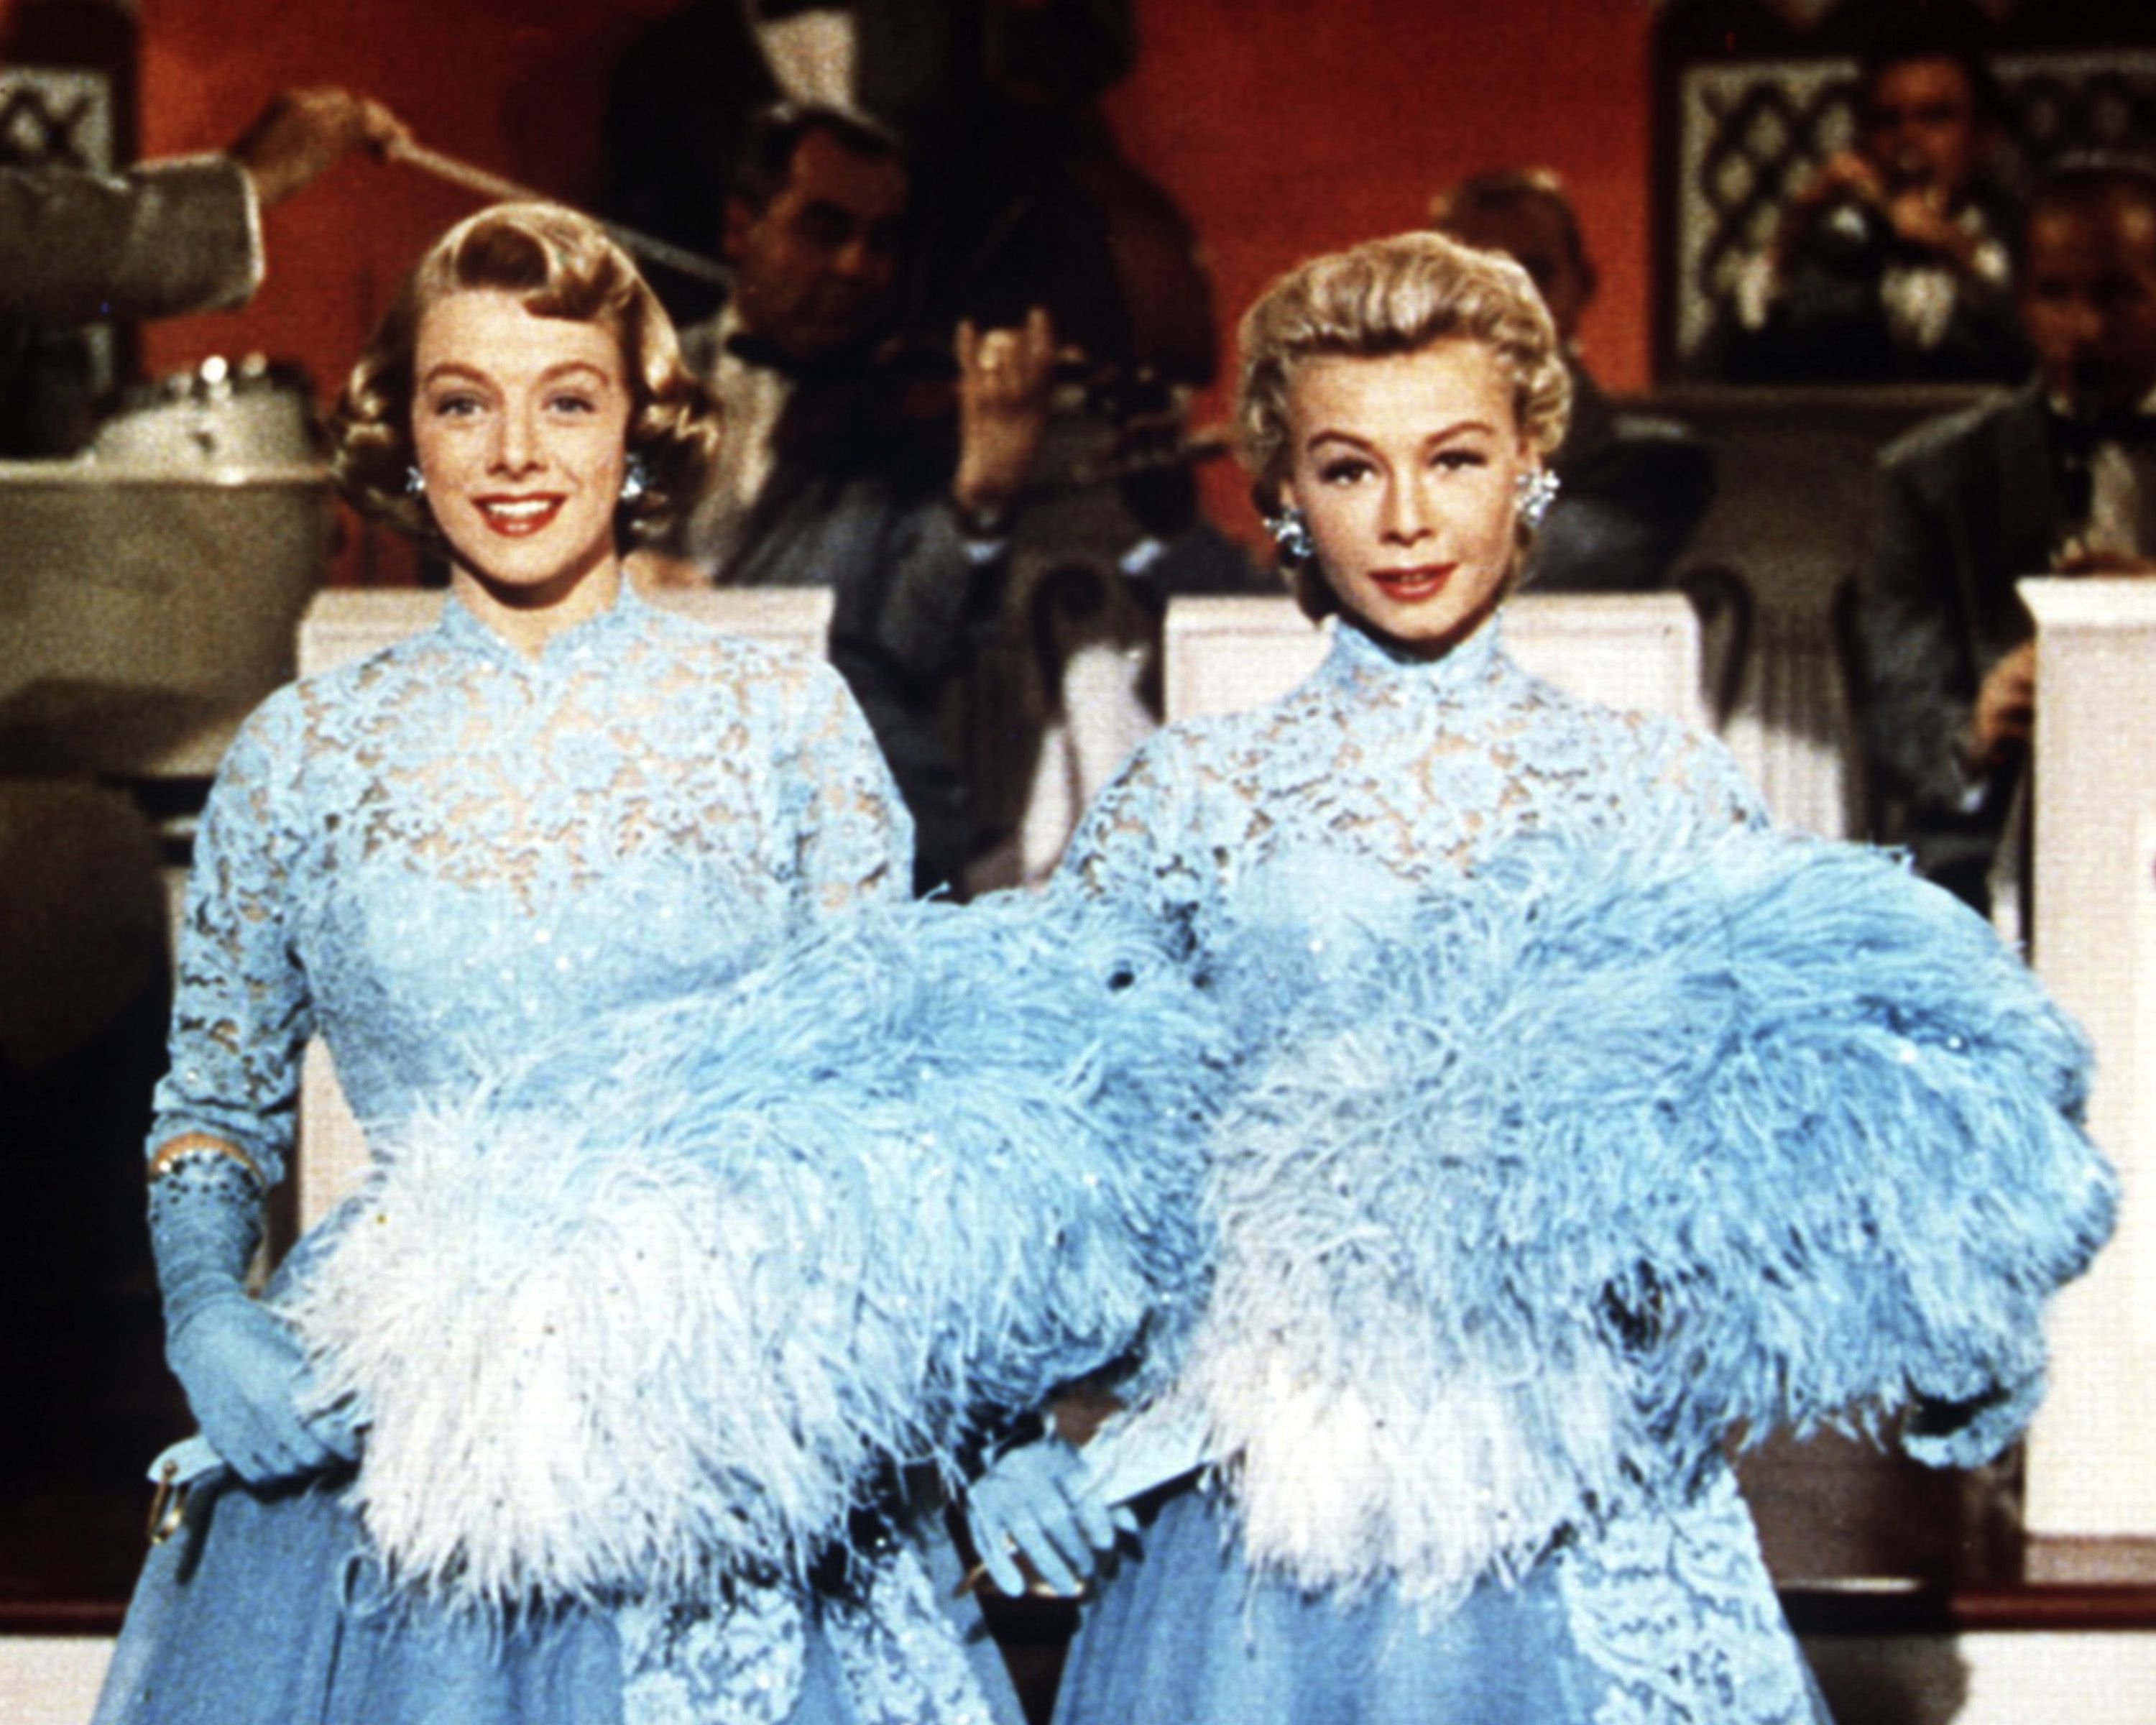 35 Surprising Facts About 'White Christmas' Movie With Bing Crosby